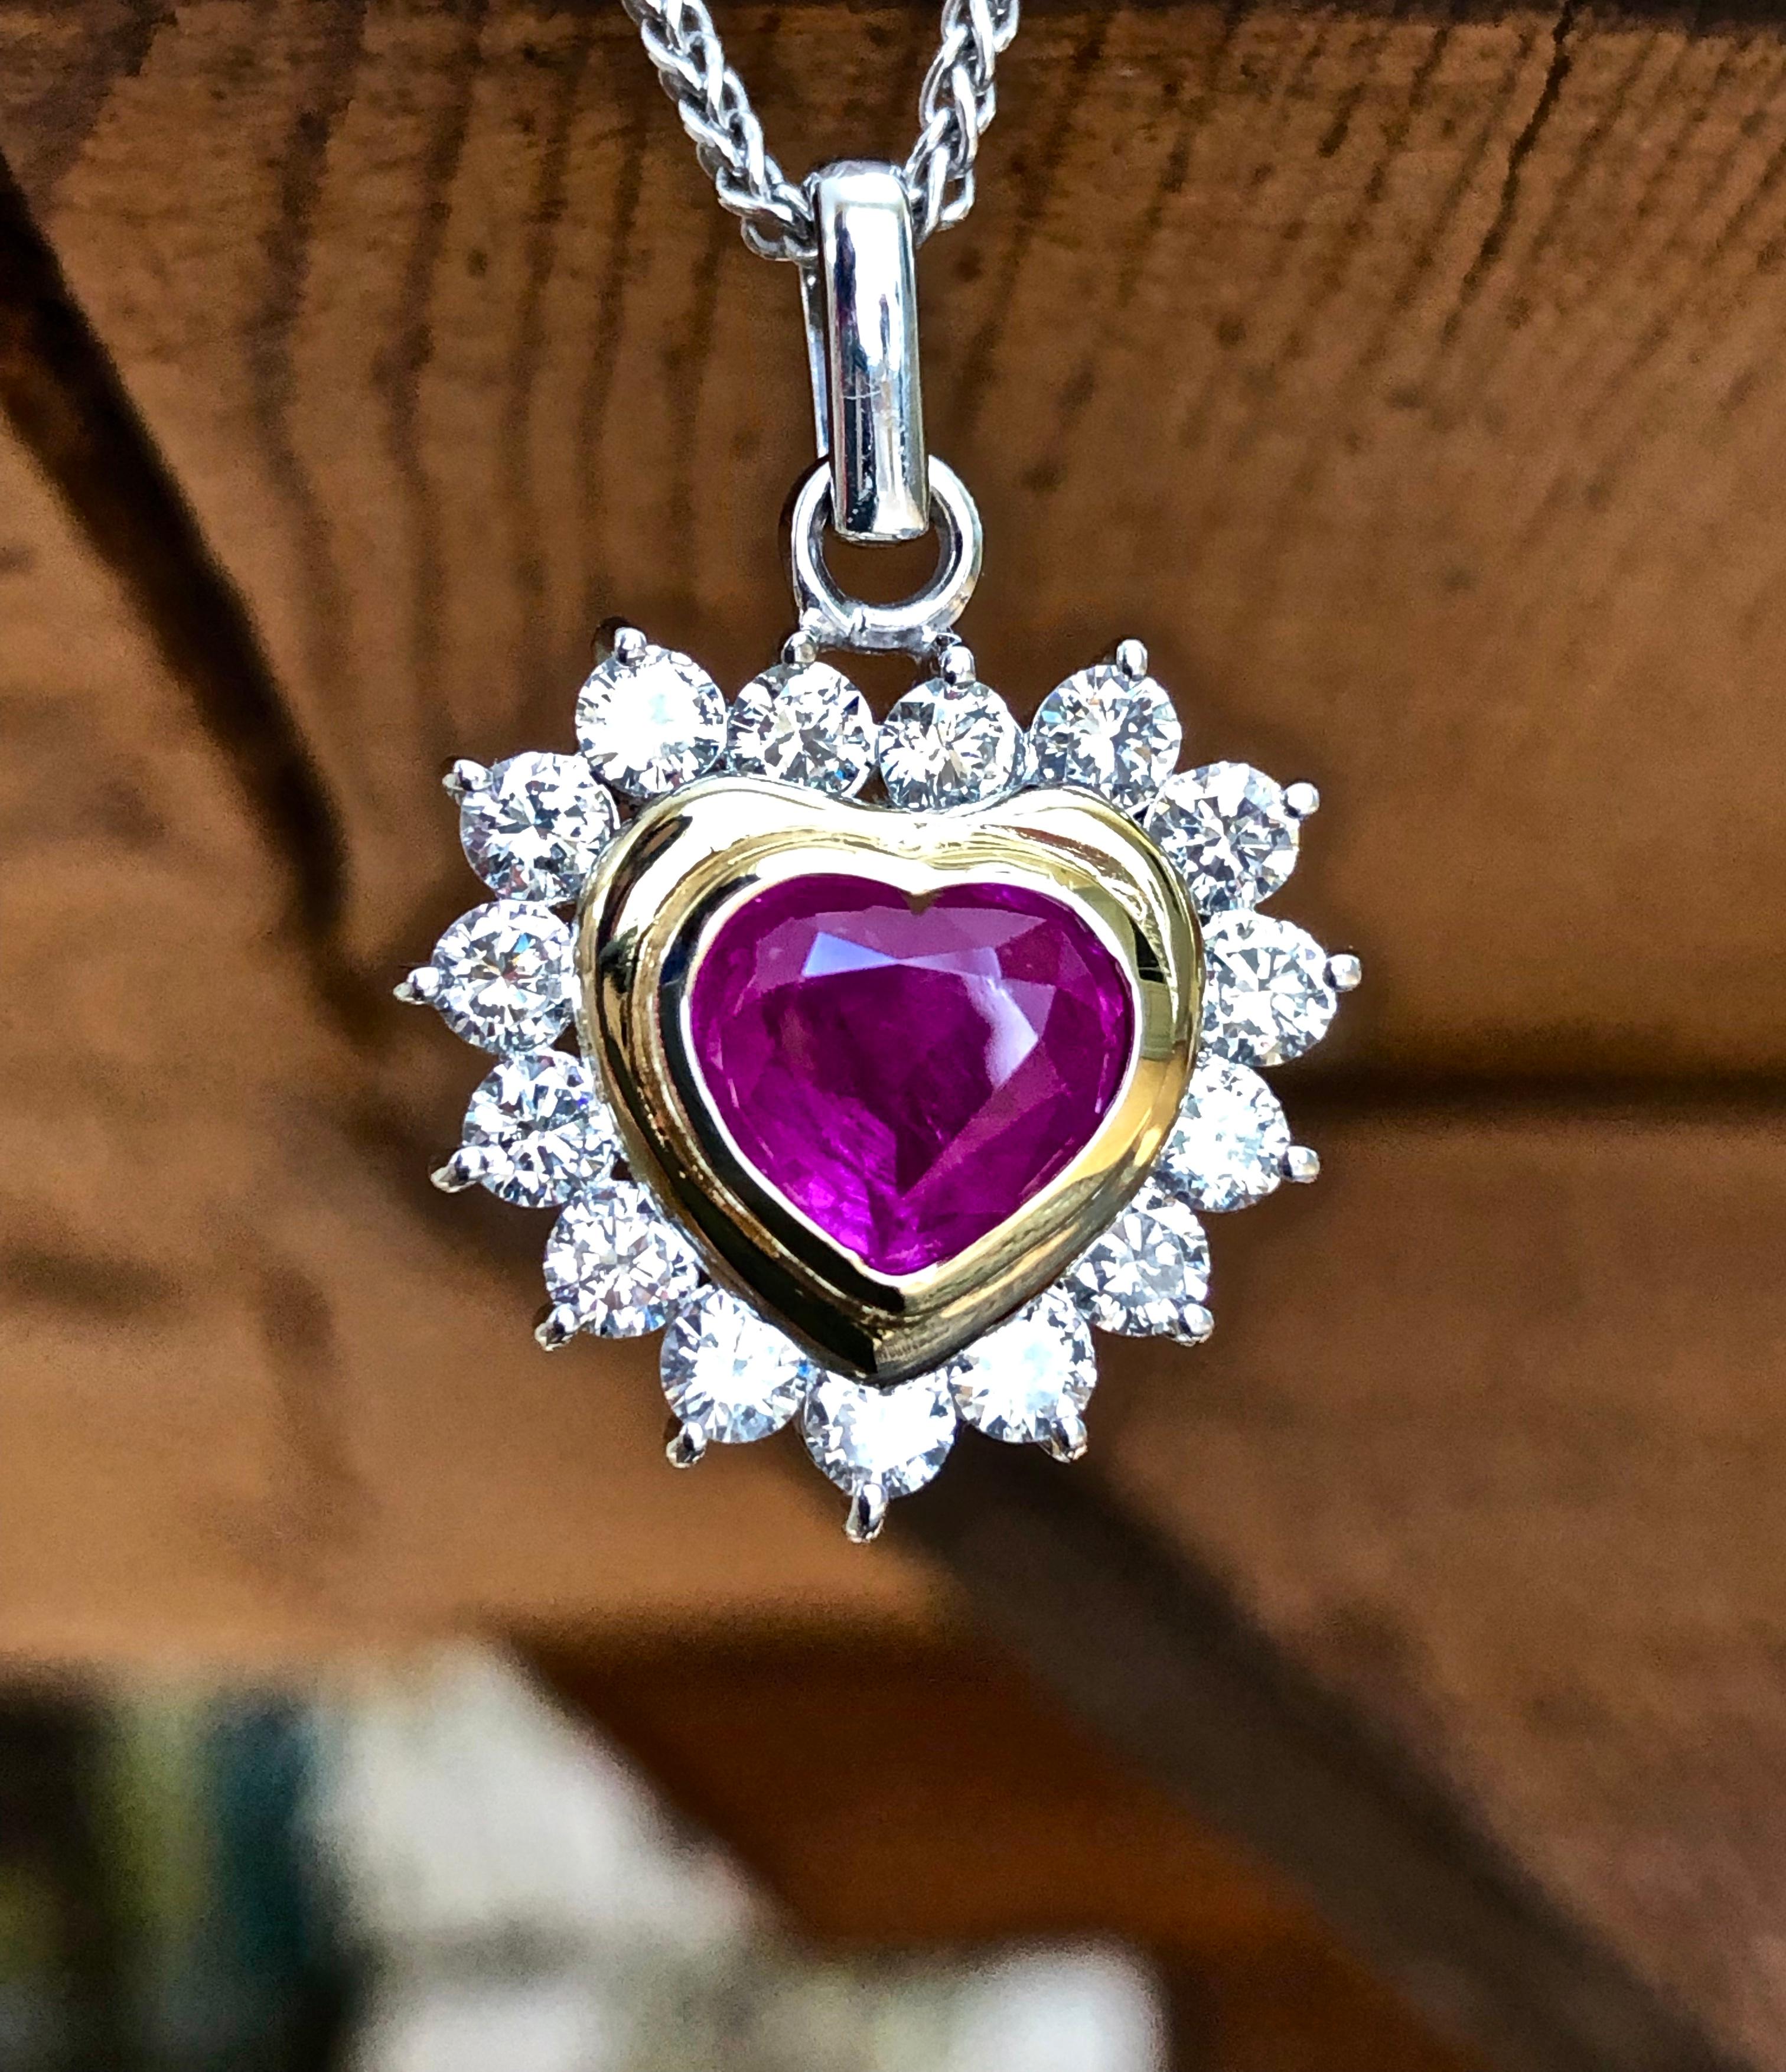 This 2.12 carat heart shape untreated Burma ruby with a rich pinkish red color, set in 18 karat gold with 15 round white diamonds totaling approximately 1.38cts H-SI1. This beautiful ruby-cut heart shape pendant measures 26mmx 18.5mm.
Composition: